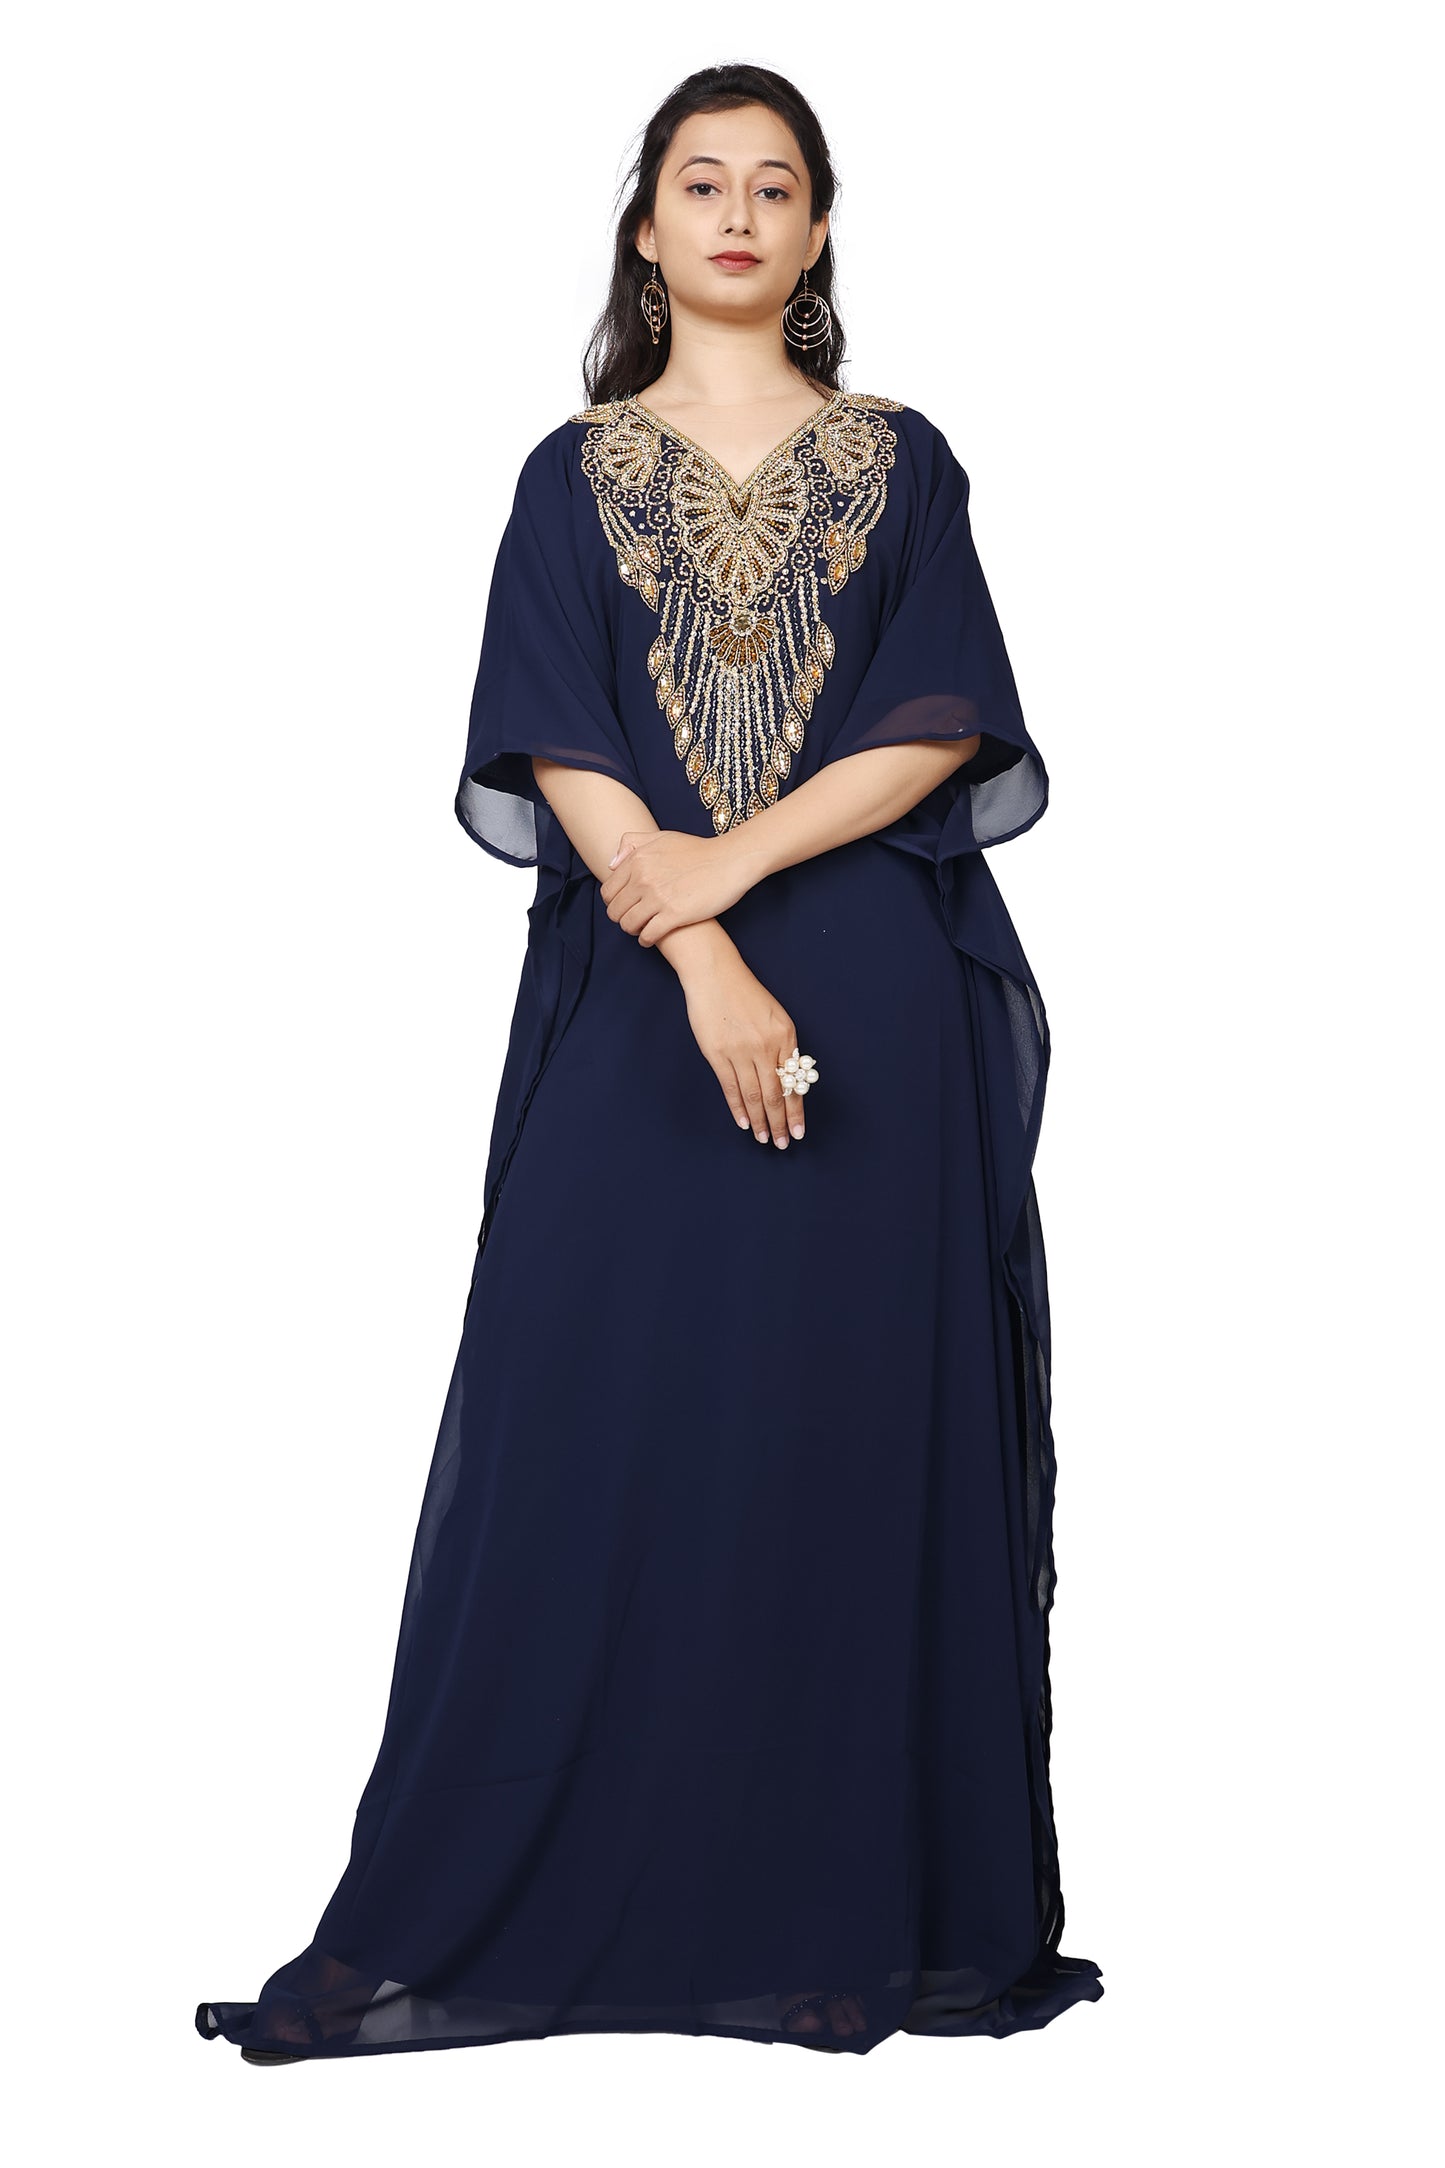 Load image into Gallery viewer, Embroidery Kaftan Handicraft Caftan In Navy Blue by Maxim Creation - Maxim Creation
